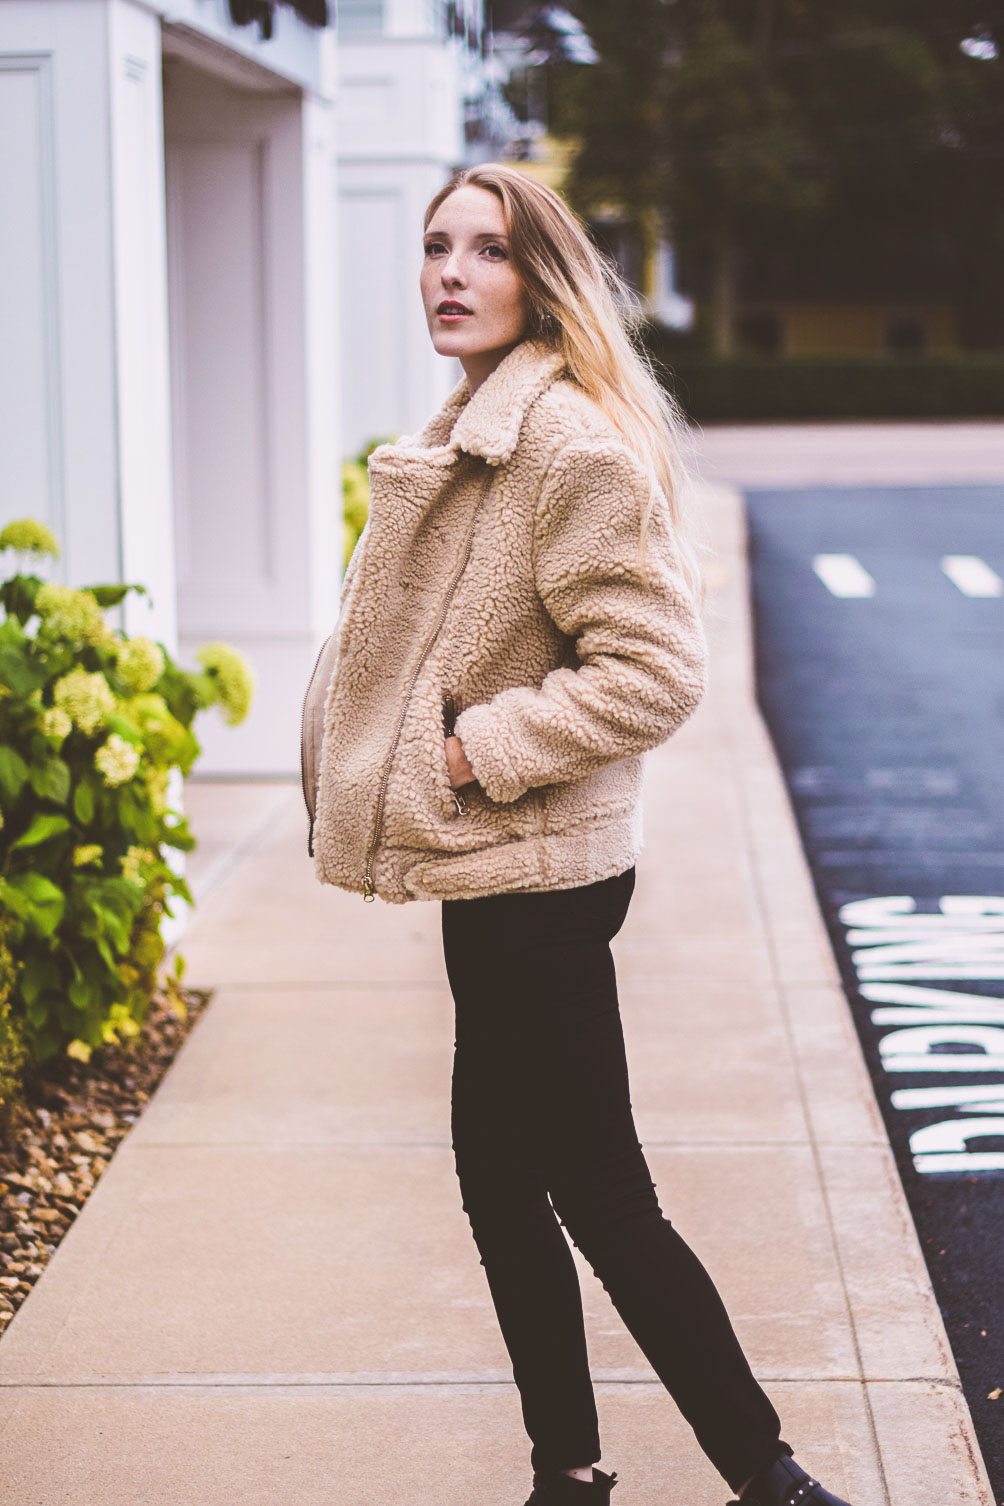 styling a teddy bear jacket as the best outerwear option for winter with a striped top and black skinny jeans